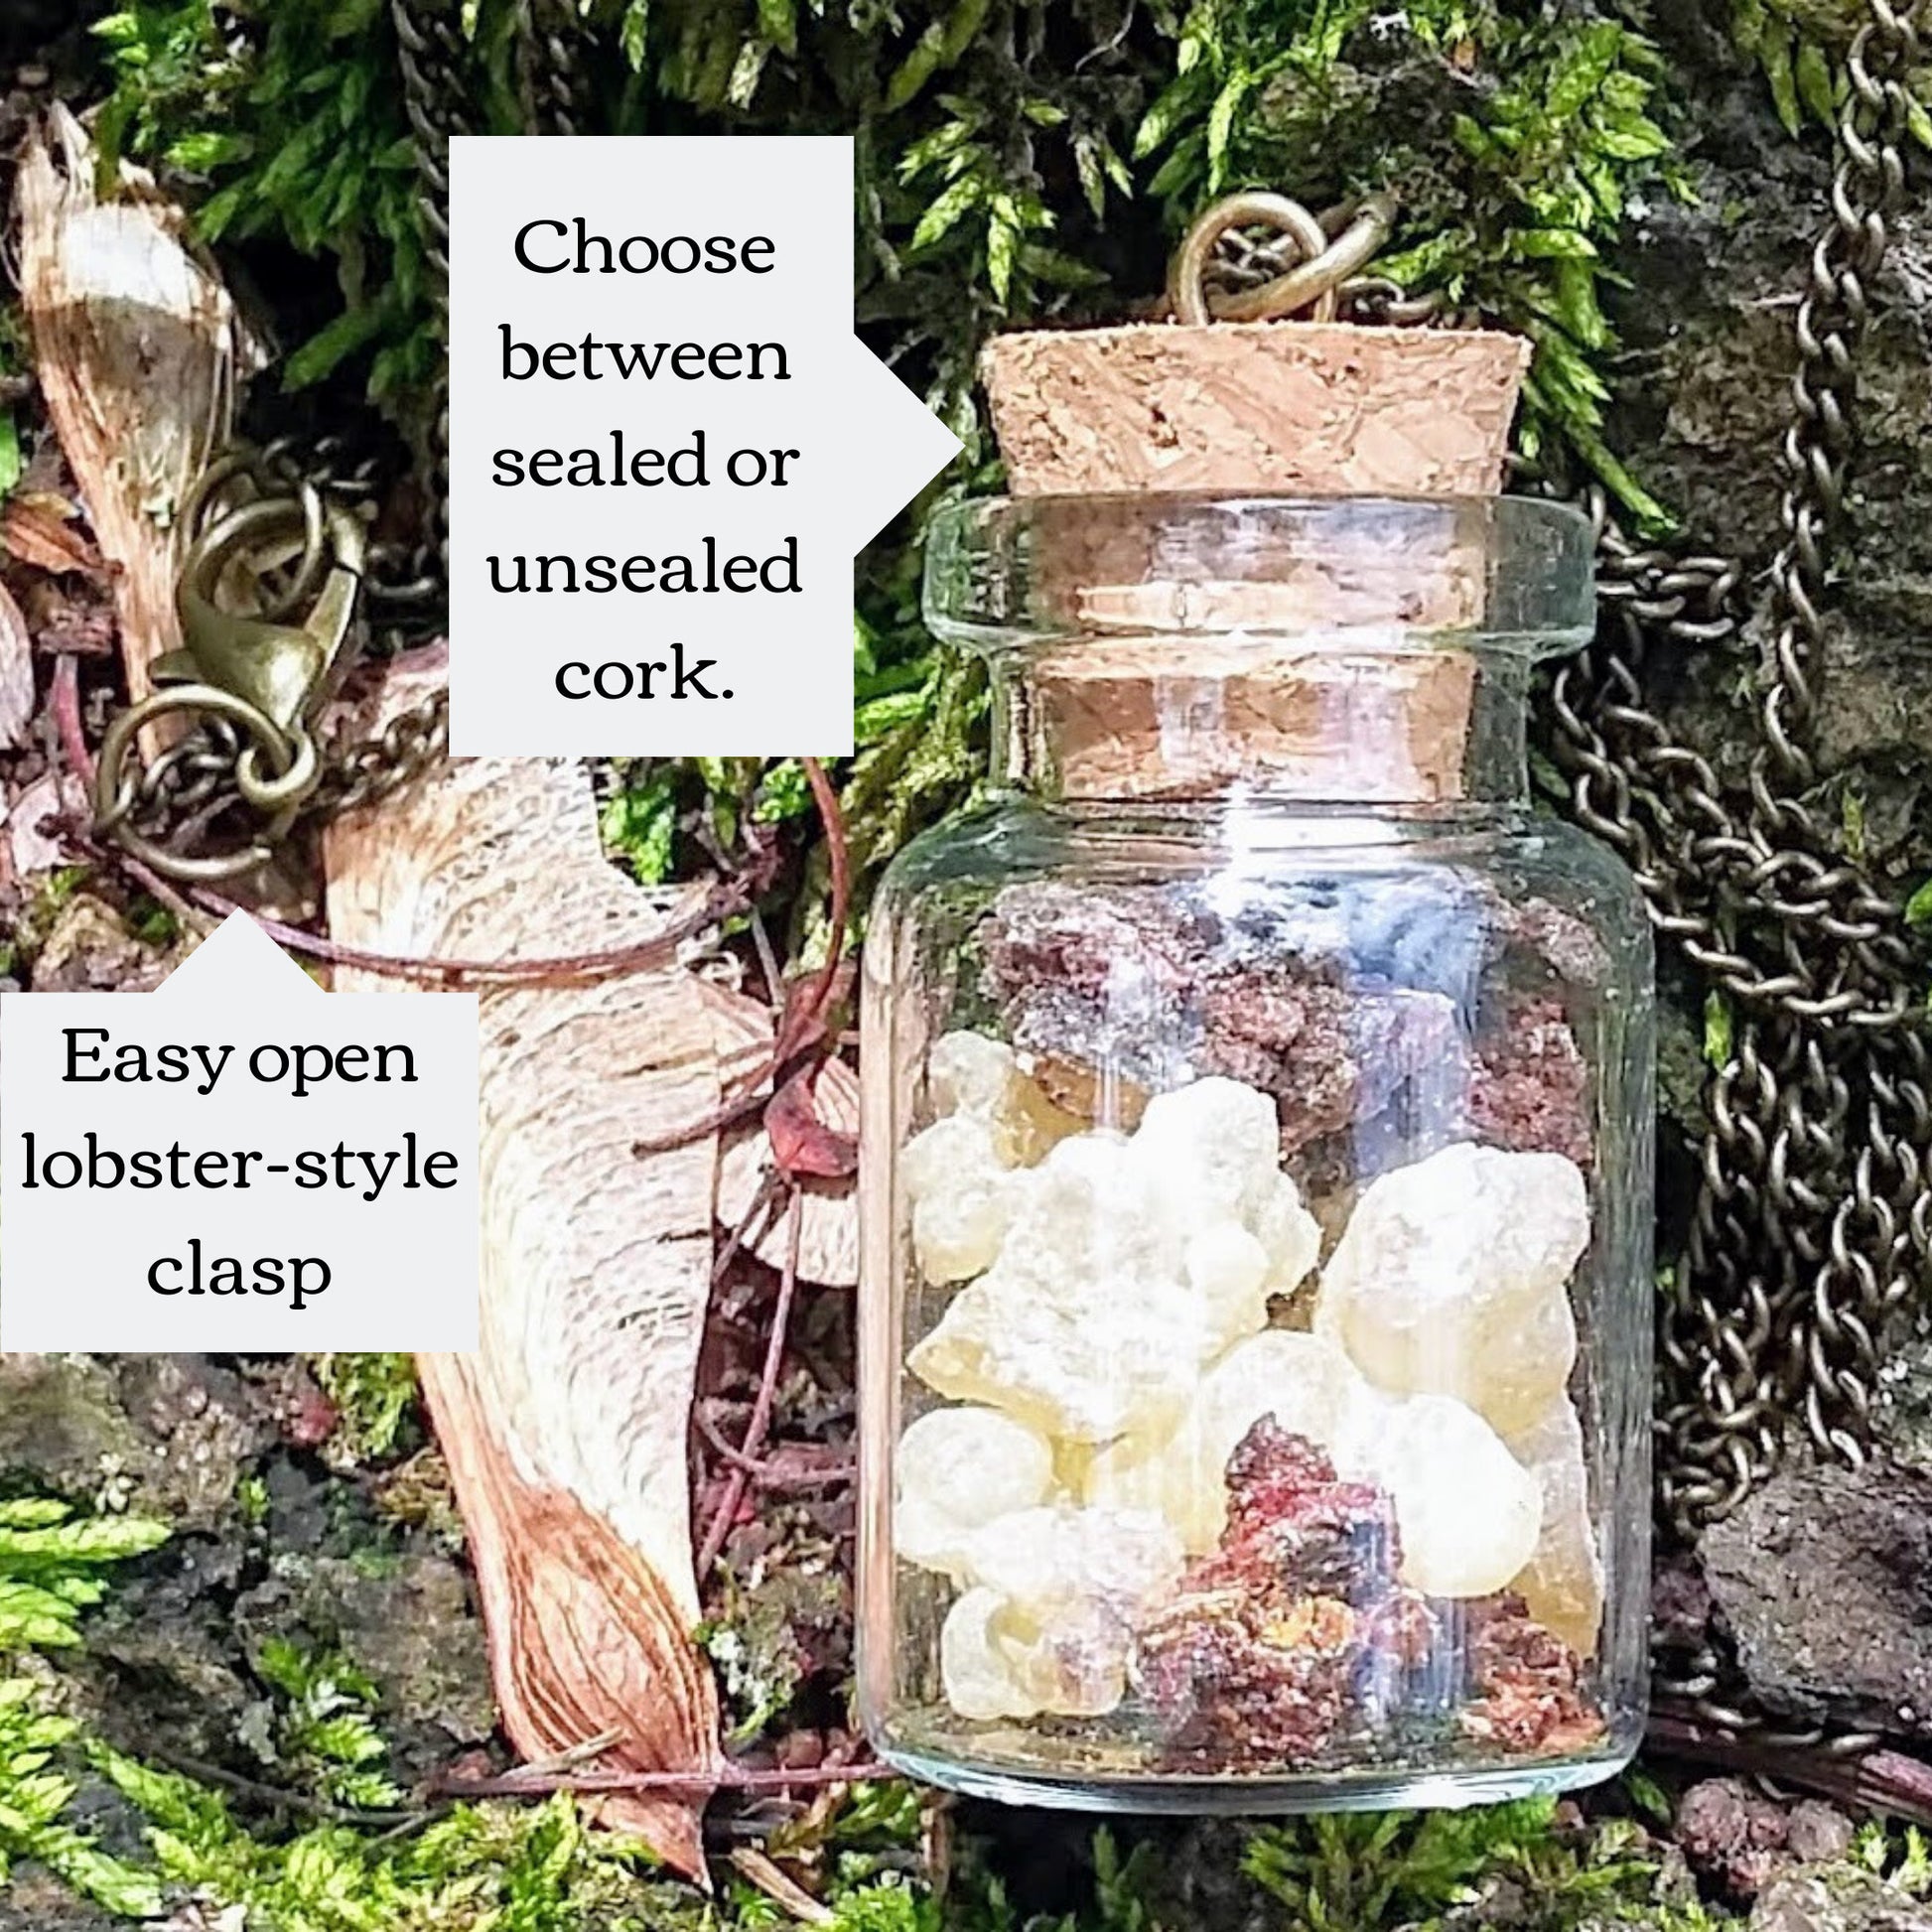 Choose between sealed or unsealed cork. Chain has an easy-open lobster clasp.